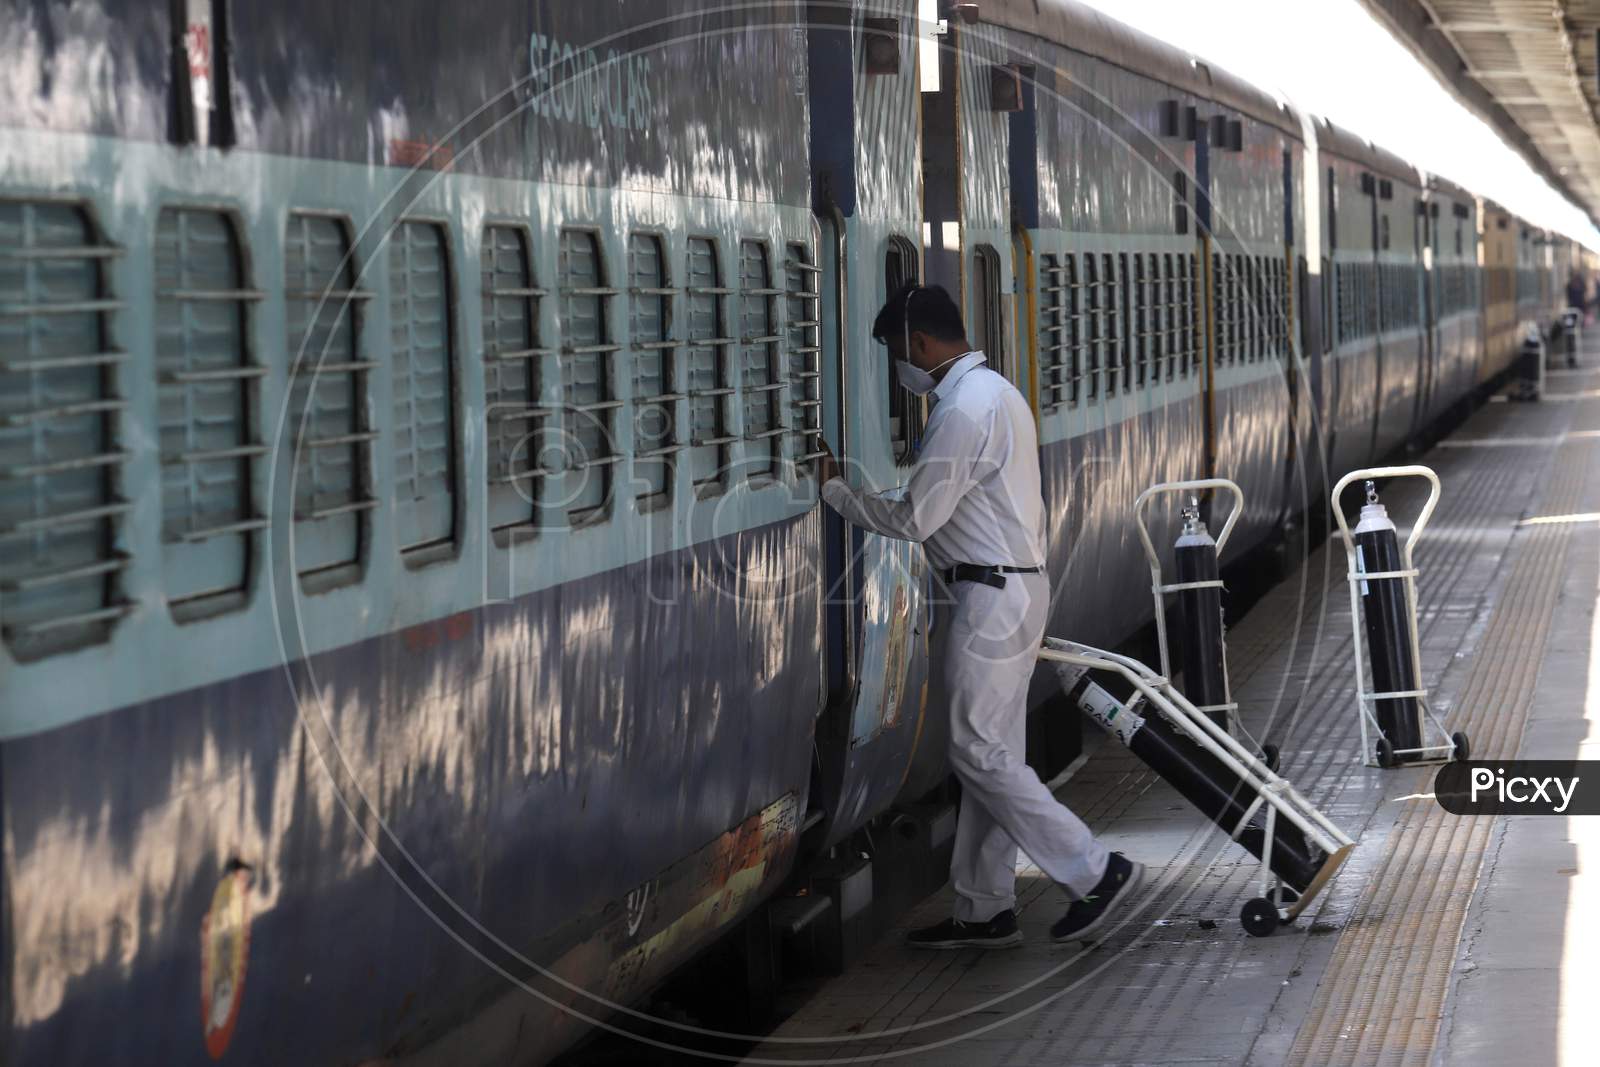 Worker Carry Oxygen Cylinders Inside Anand Vihar Railway Station, Where Train Coaches Being Temporarily Converted Into Covid-19 Isolation Facilities, In New Delhi, India On June 17, 2020.